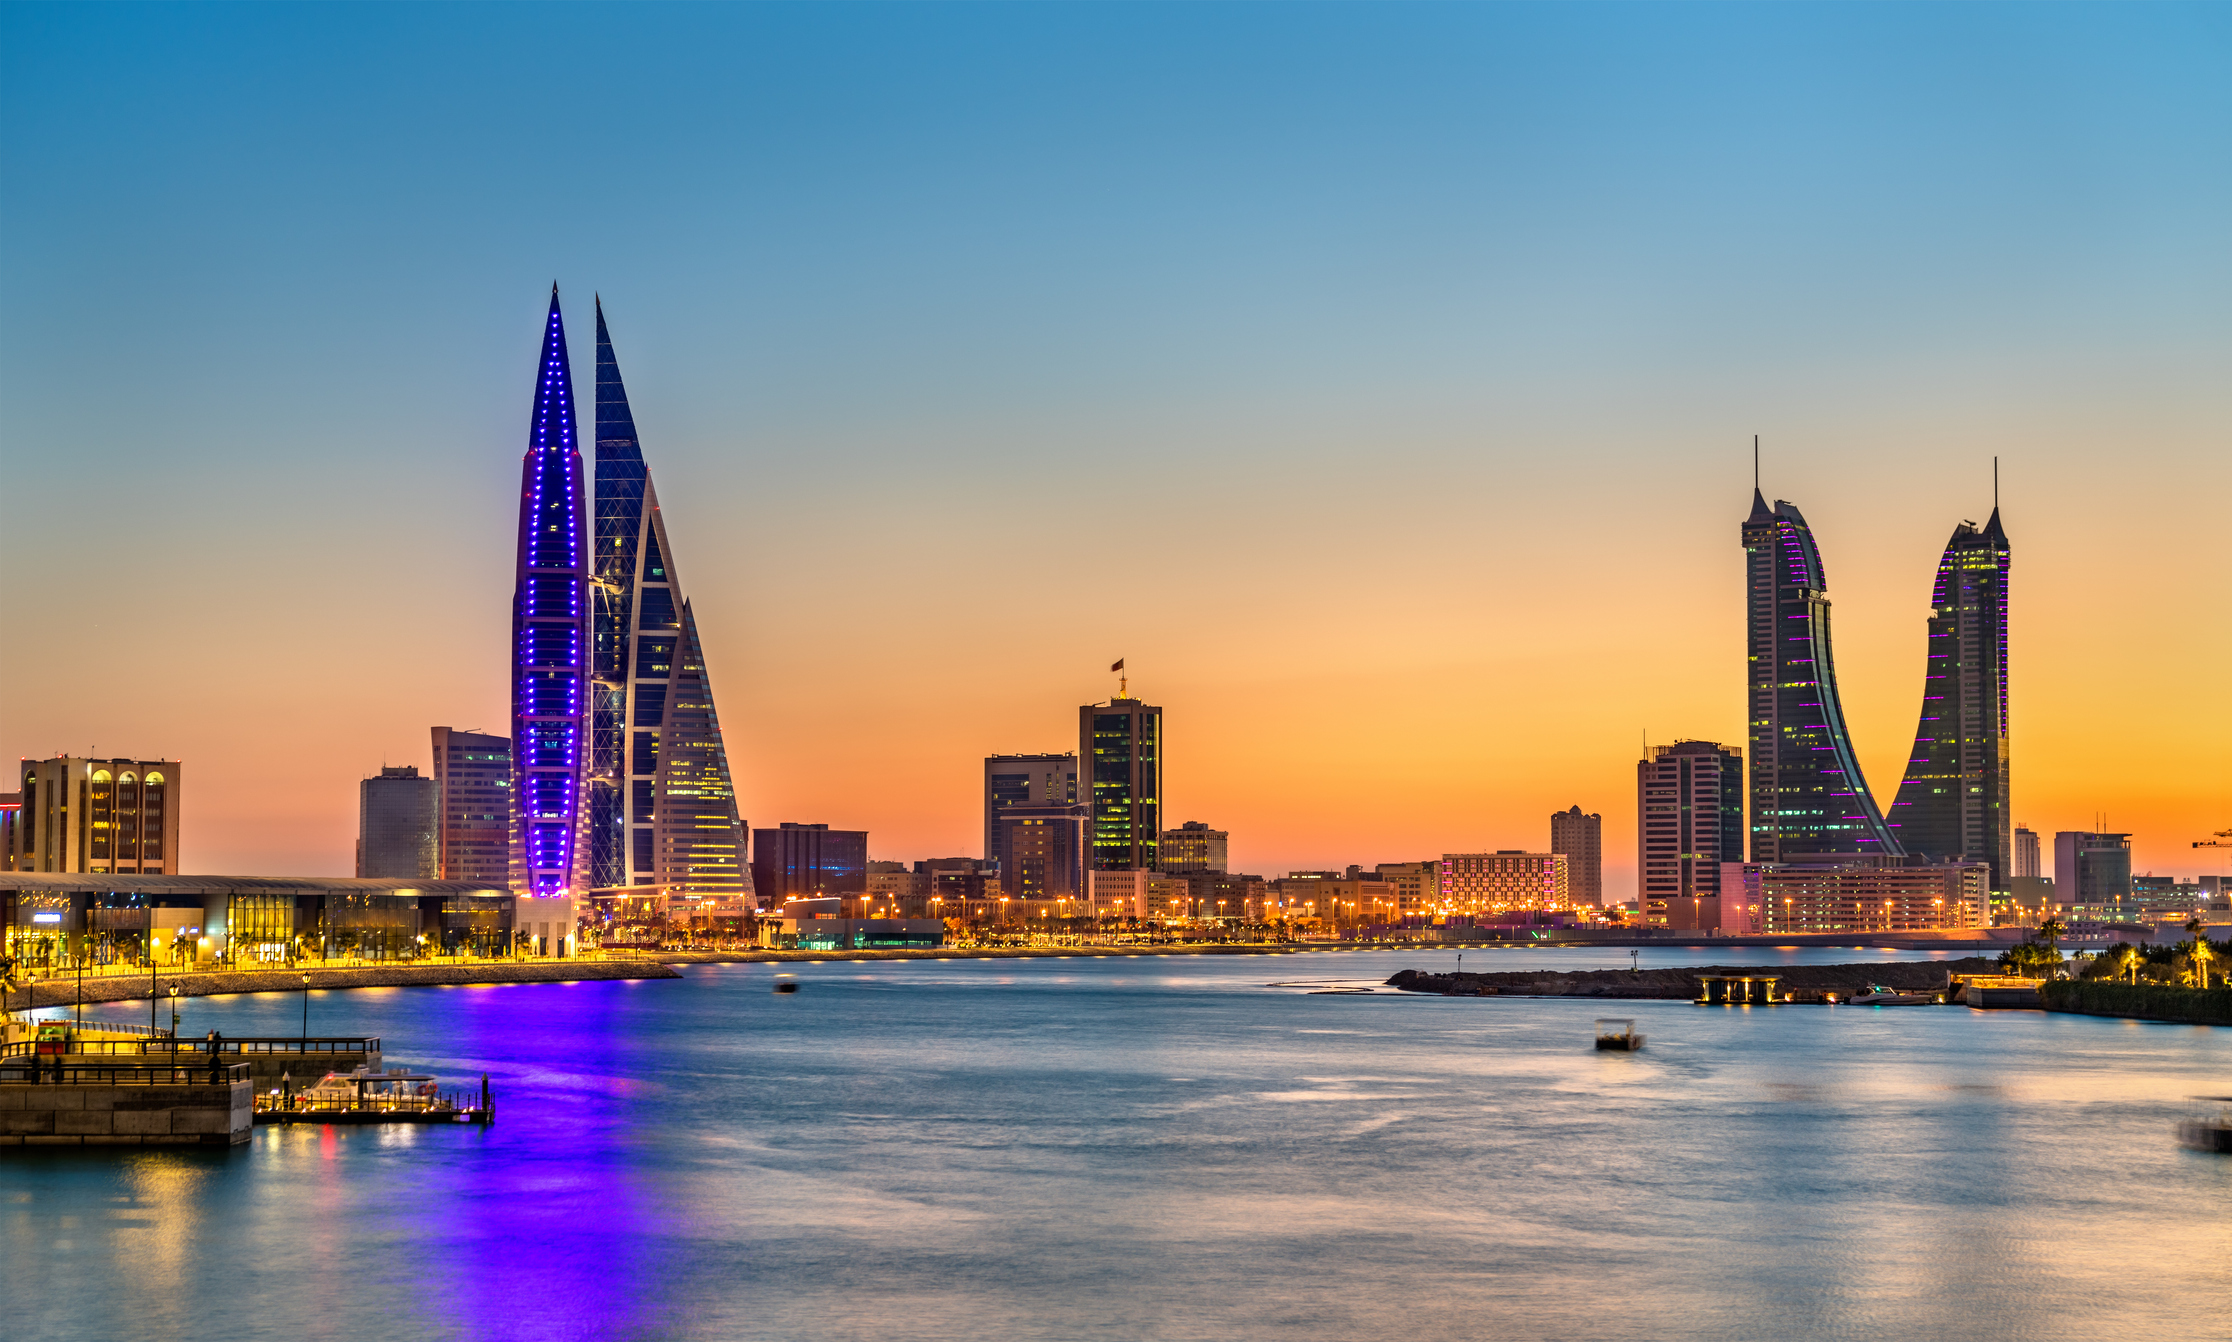 Arthur D. Little appoints Andreas Buelow as Partner and Head of newly launched Bahrain office